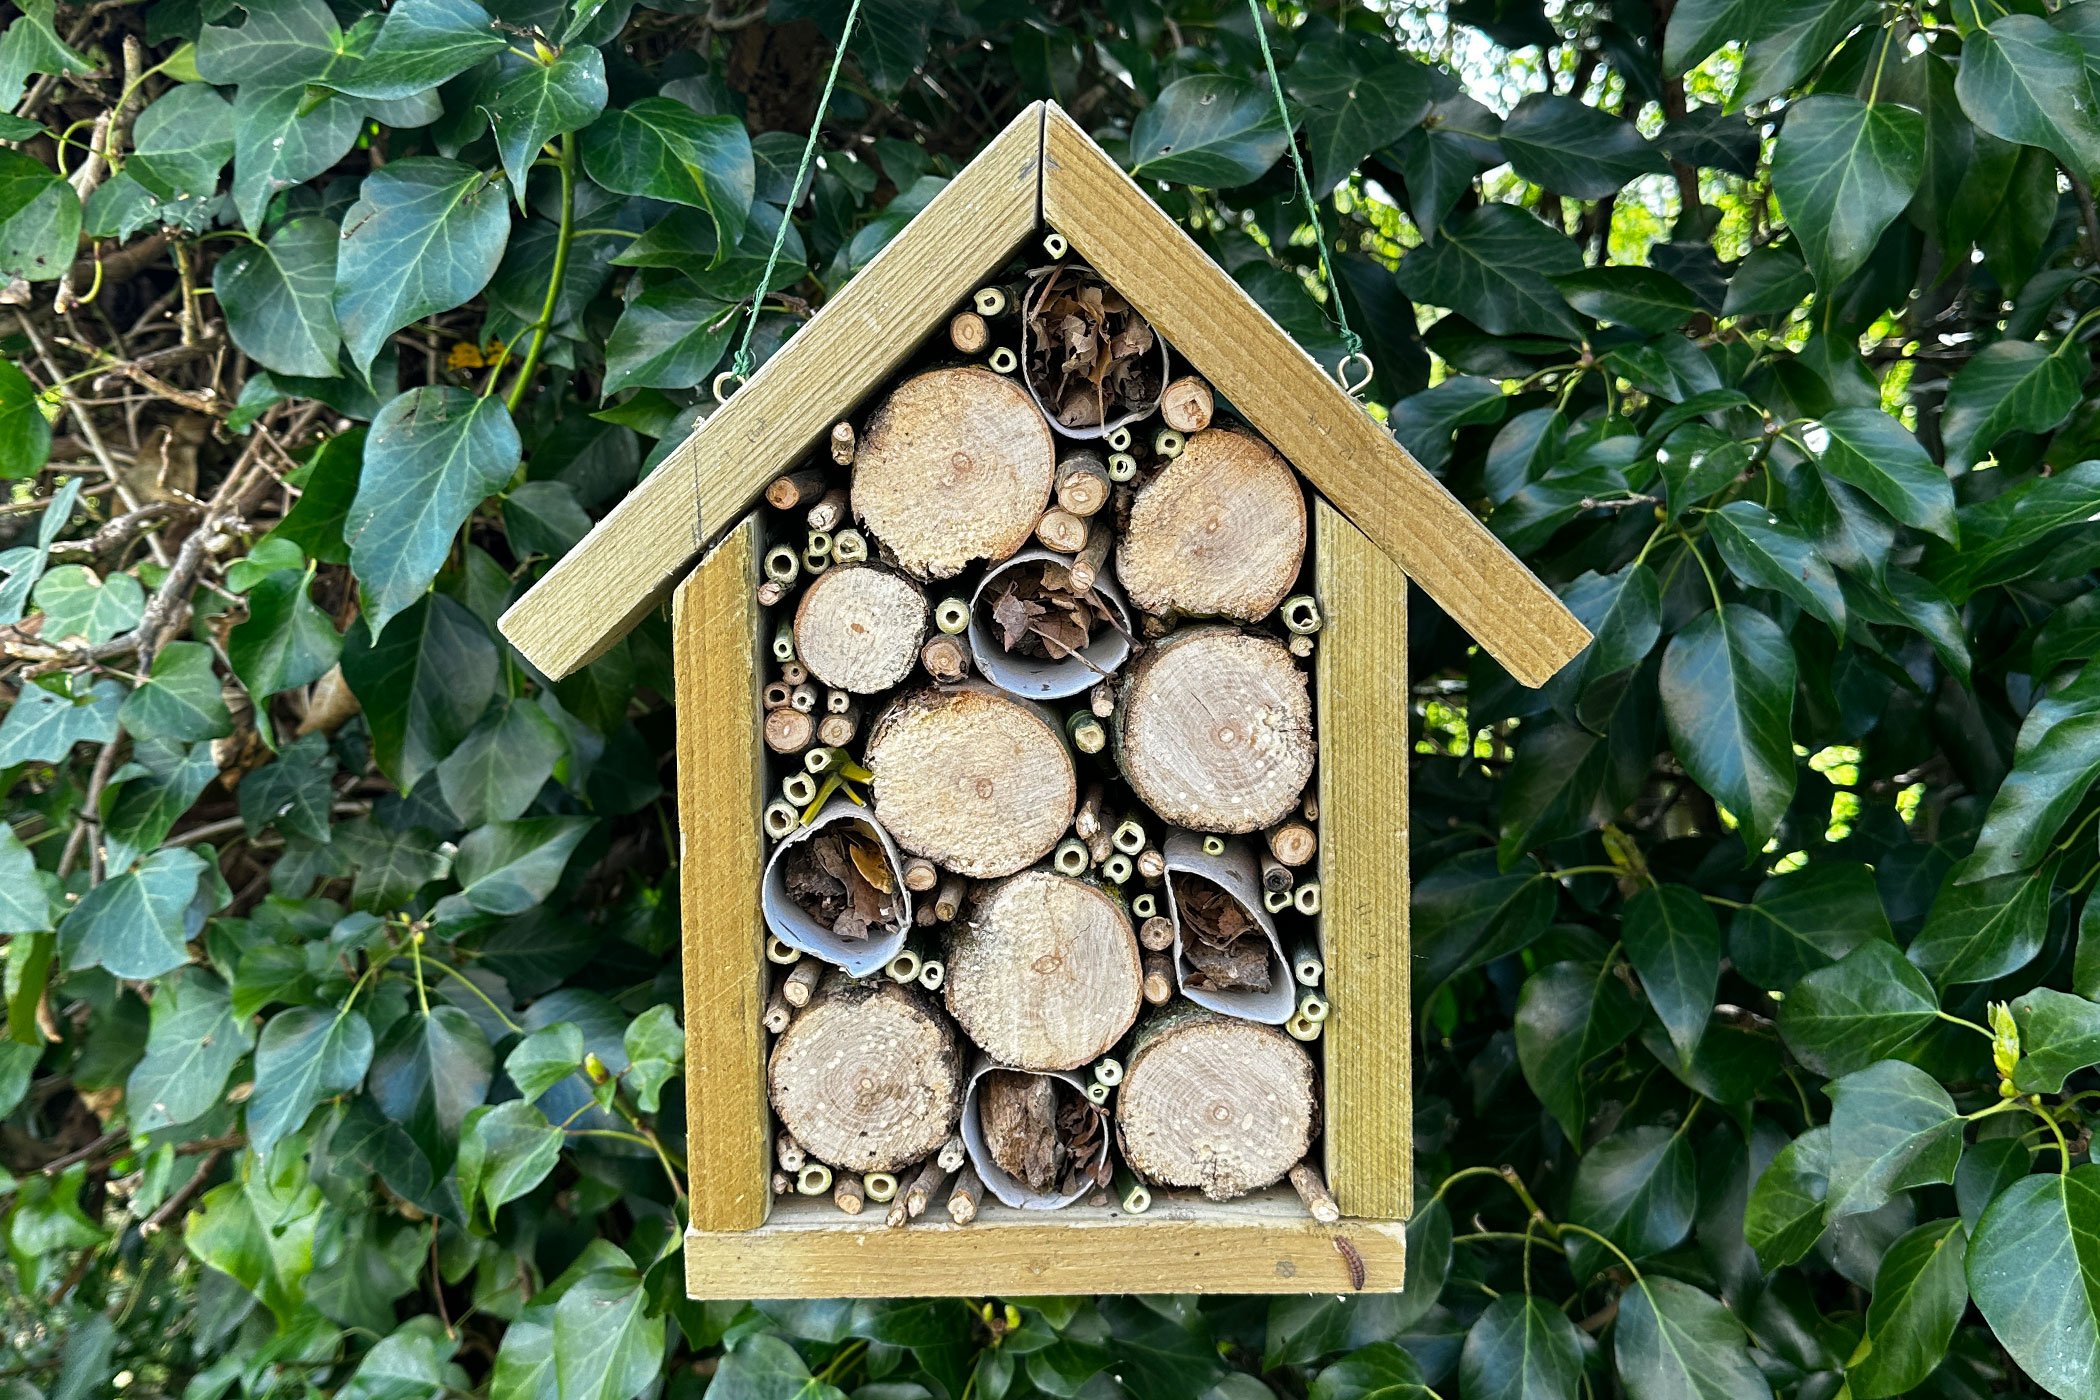 Step Five - Hang your finished bug hotel in the garden to attract bugs to your garden